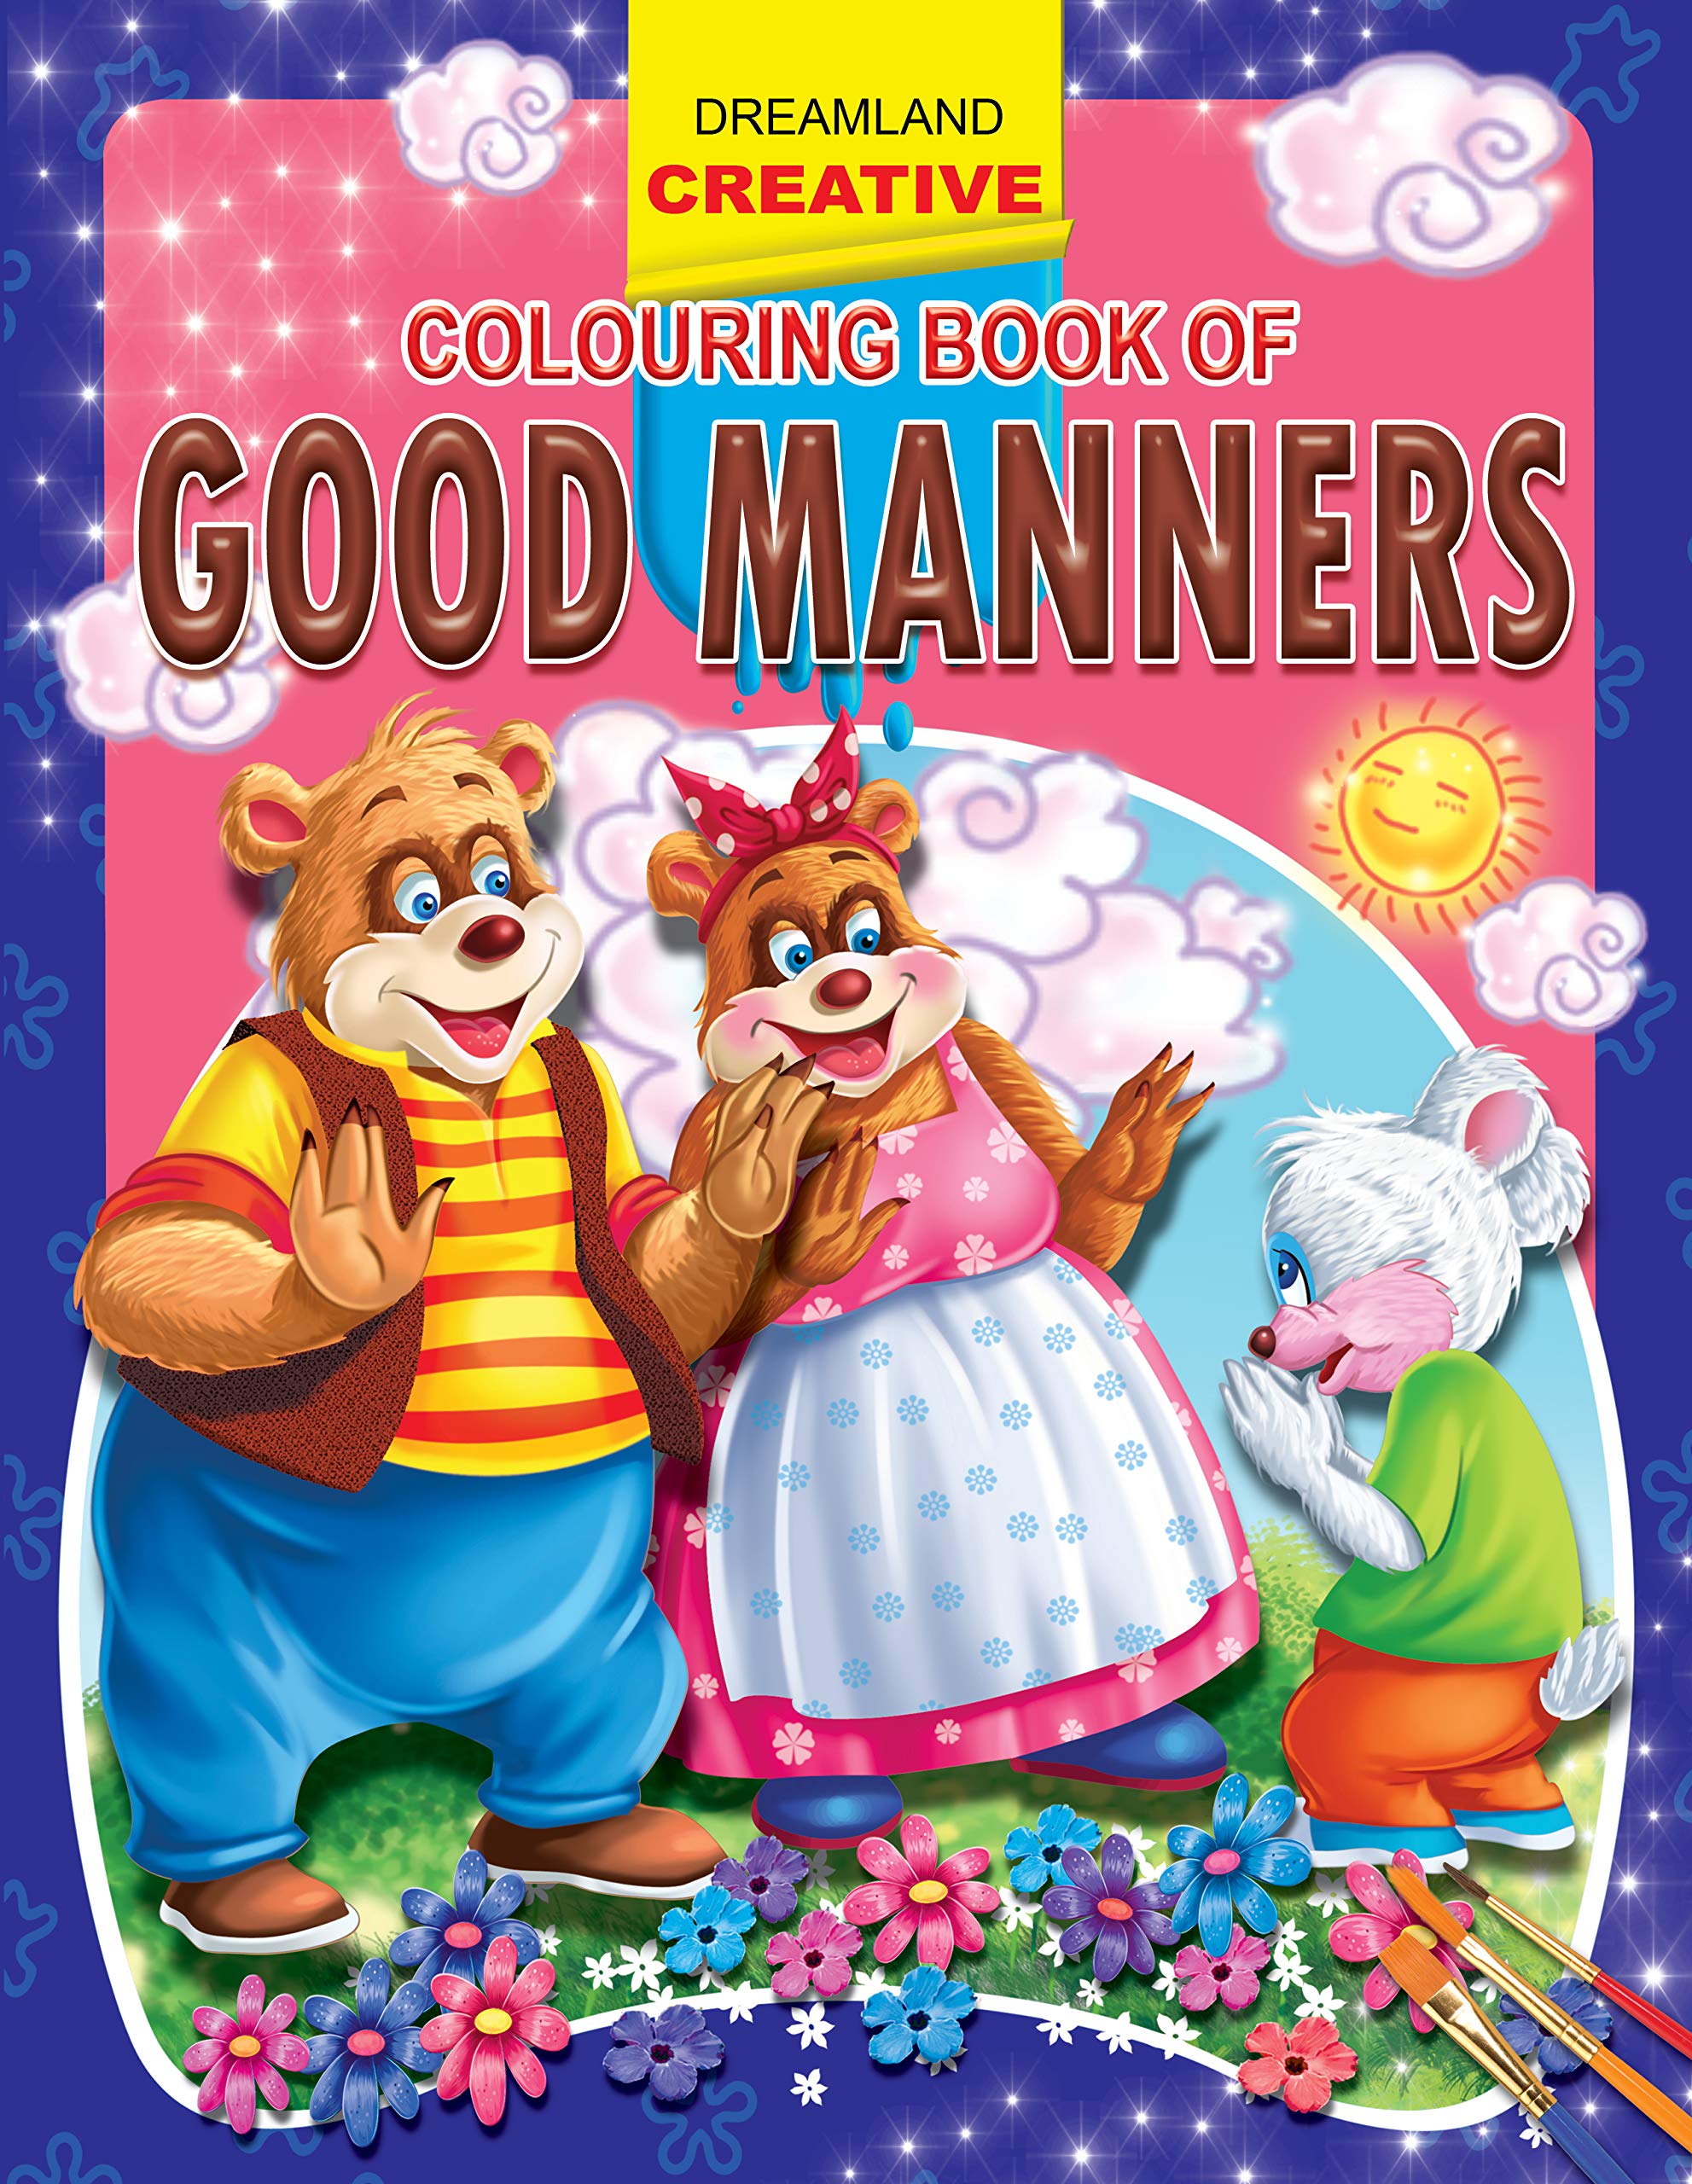 Good Manners (Creative Colouring Books)